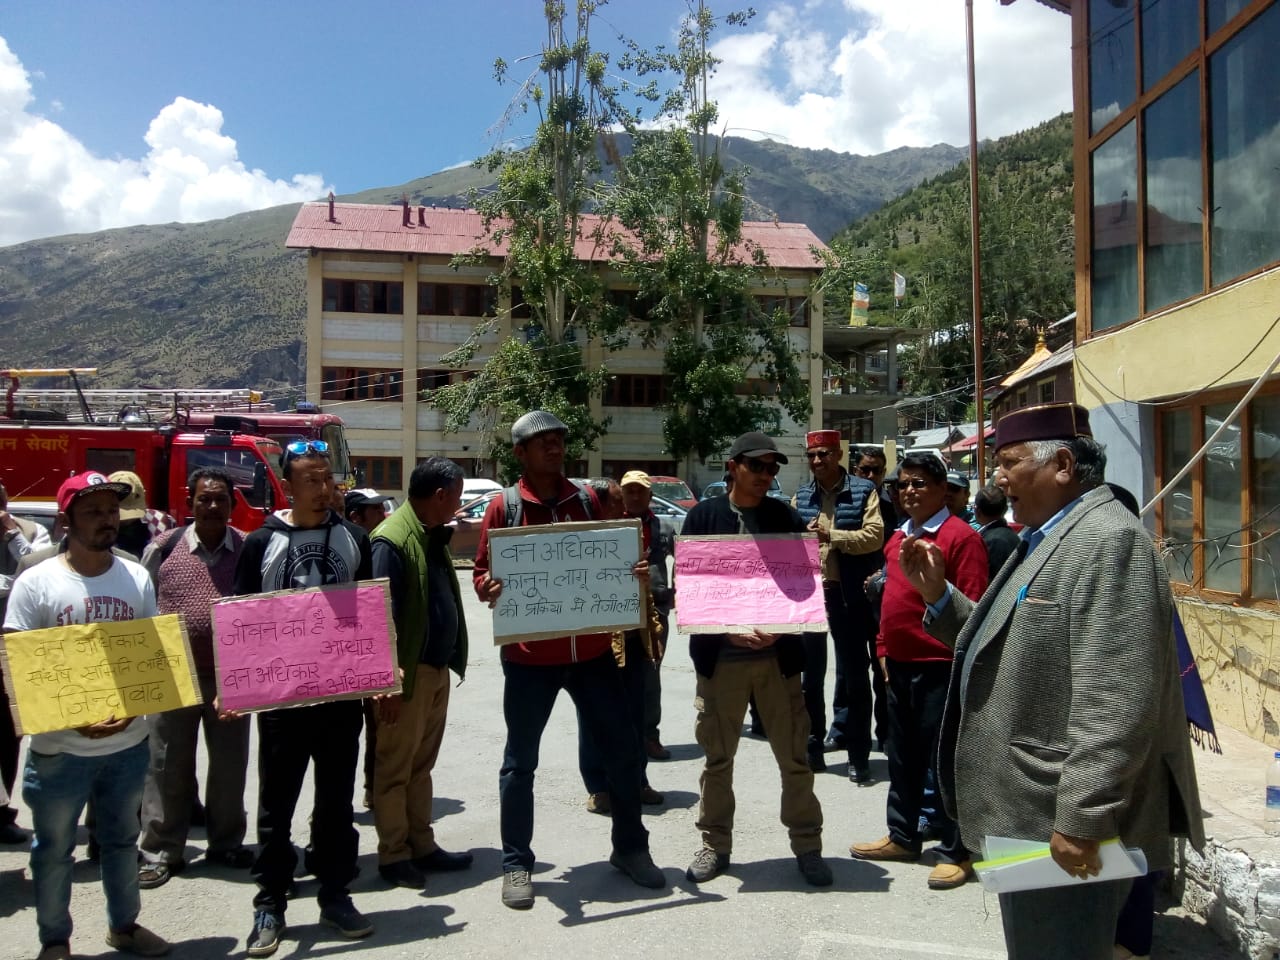 Members of Save Lahaul Spiti Society protesting in front of the District Collector office in Keylong.